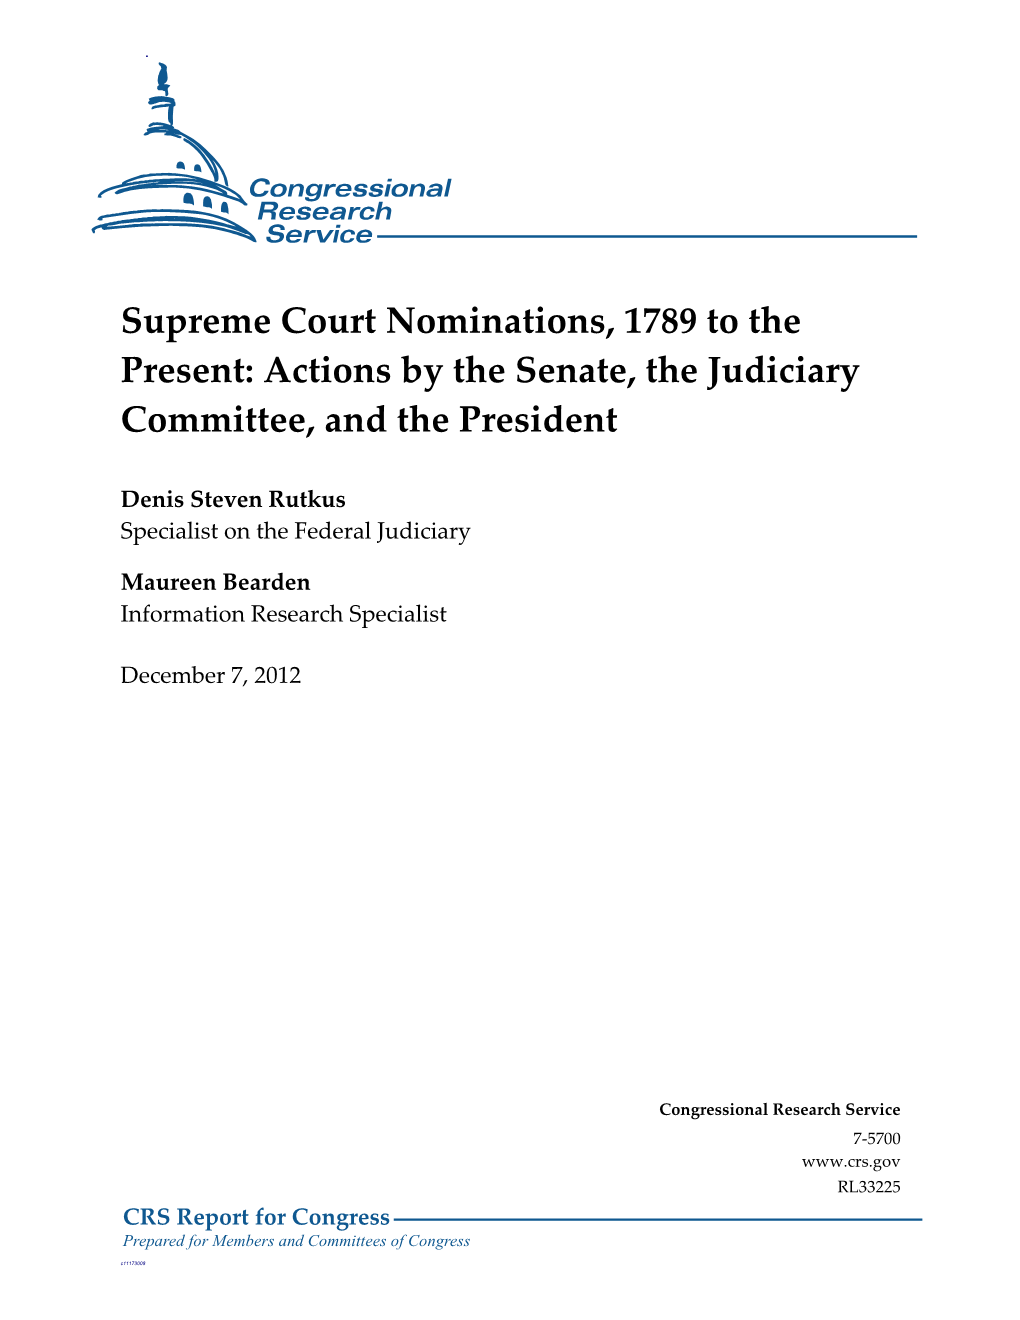 Supreme Court Nominations, 1789 to the Present: Actions by the Senate, the Judiciary Committee, and the President